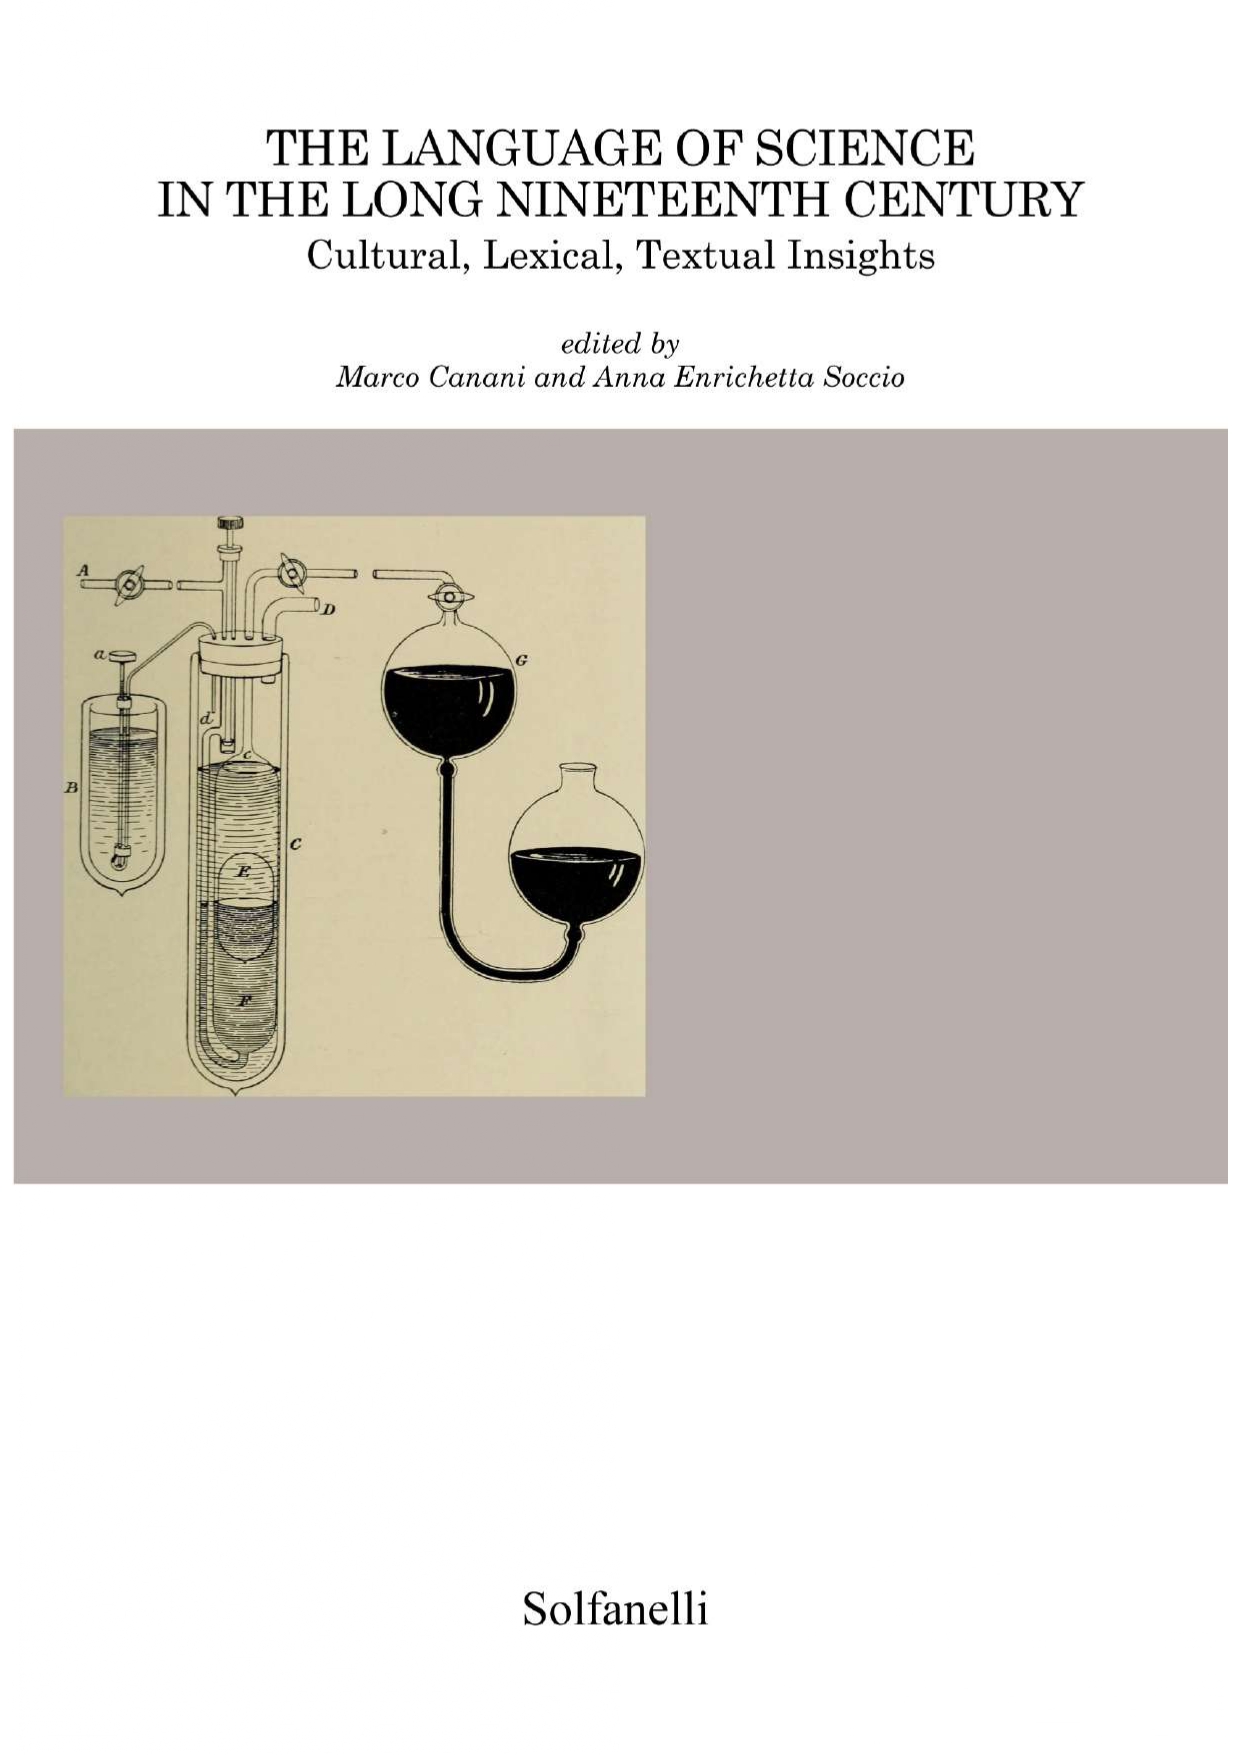 THE LANGUAGE OF SCIENCE IN THE LONG NINETEENTH CENTURY